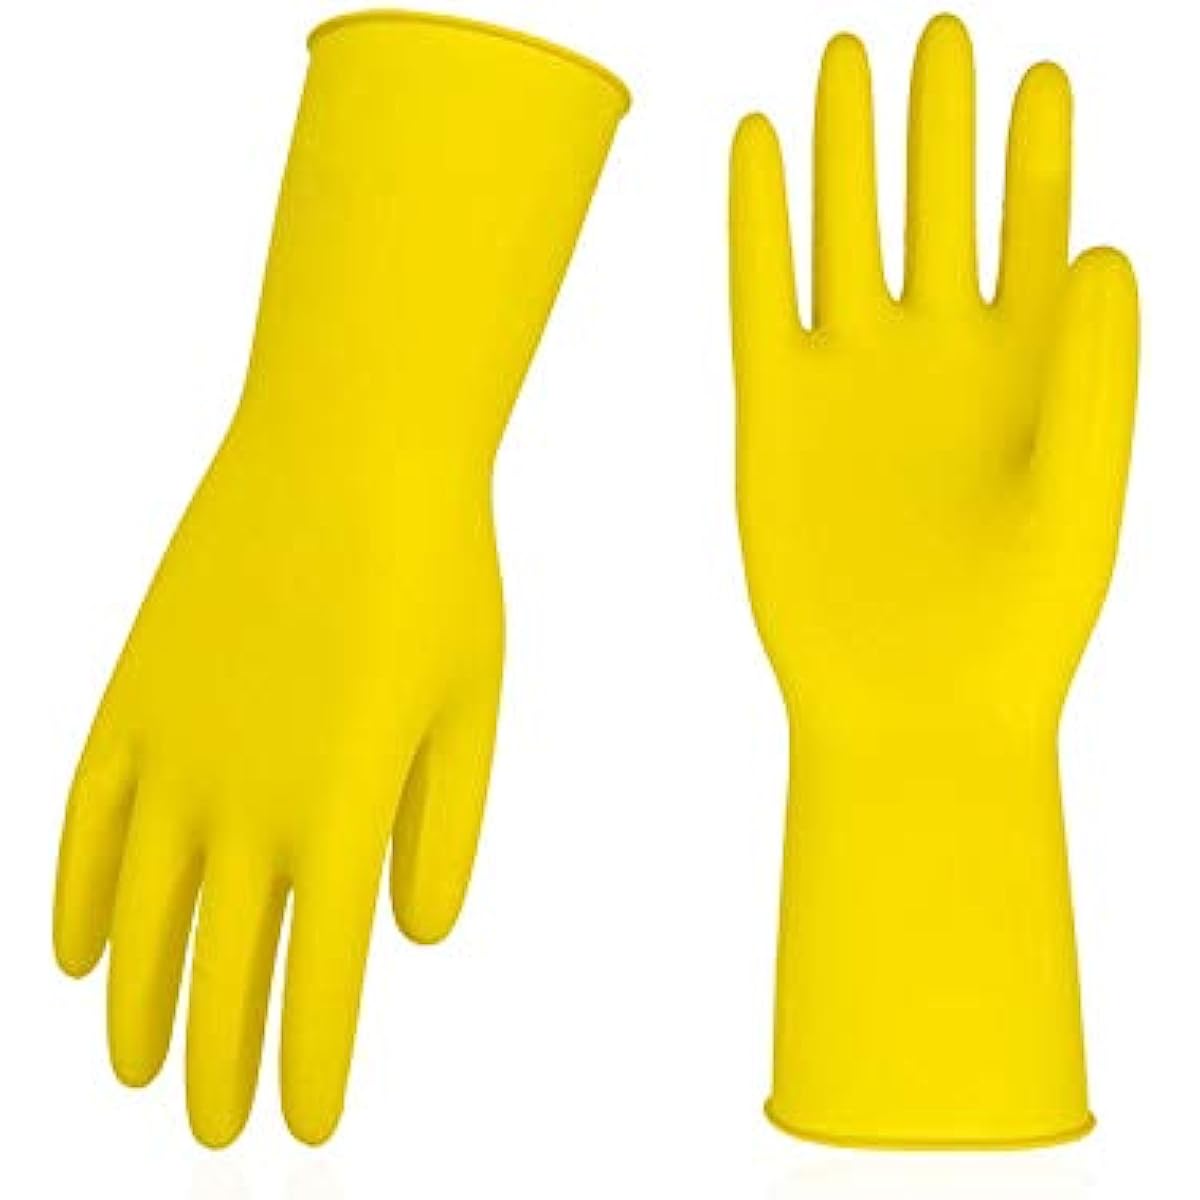 1 Pair Reusable Household Gloves for Kitchen Cleaning, Working, Painting, Gardening & Pet Care